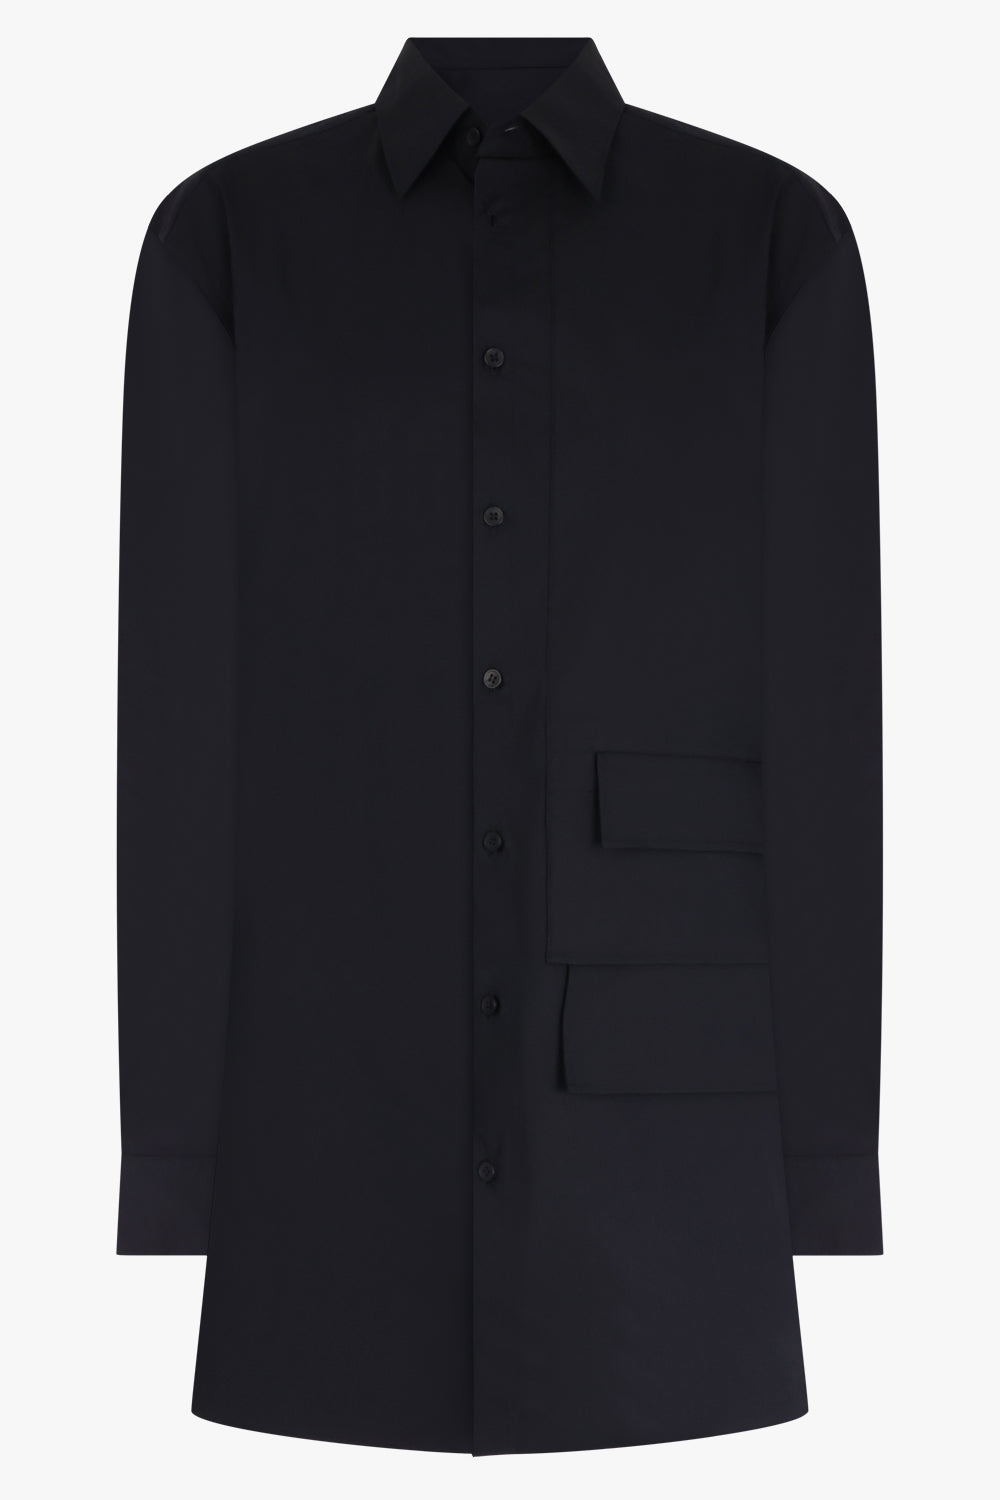 Y-3 RTW Relaxed Button Down Shirt | Black